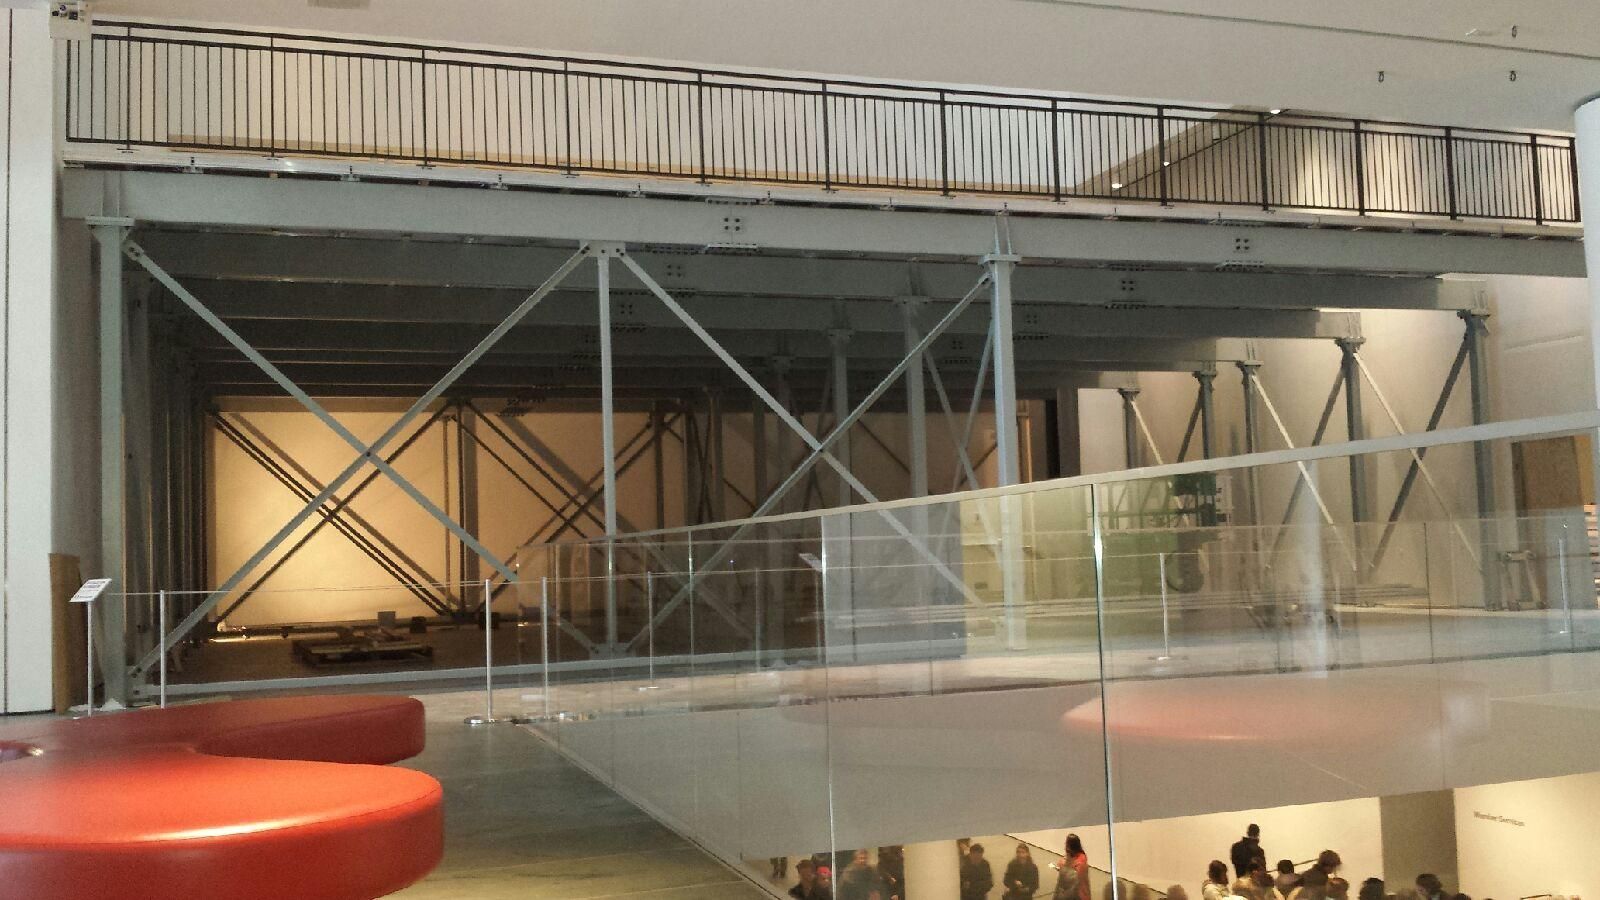 Staging Concepts SC90 platforms bridge supports and IBC guardrails at the Museum of Modern Art